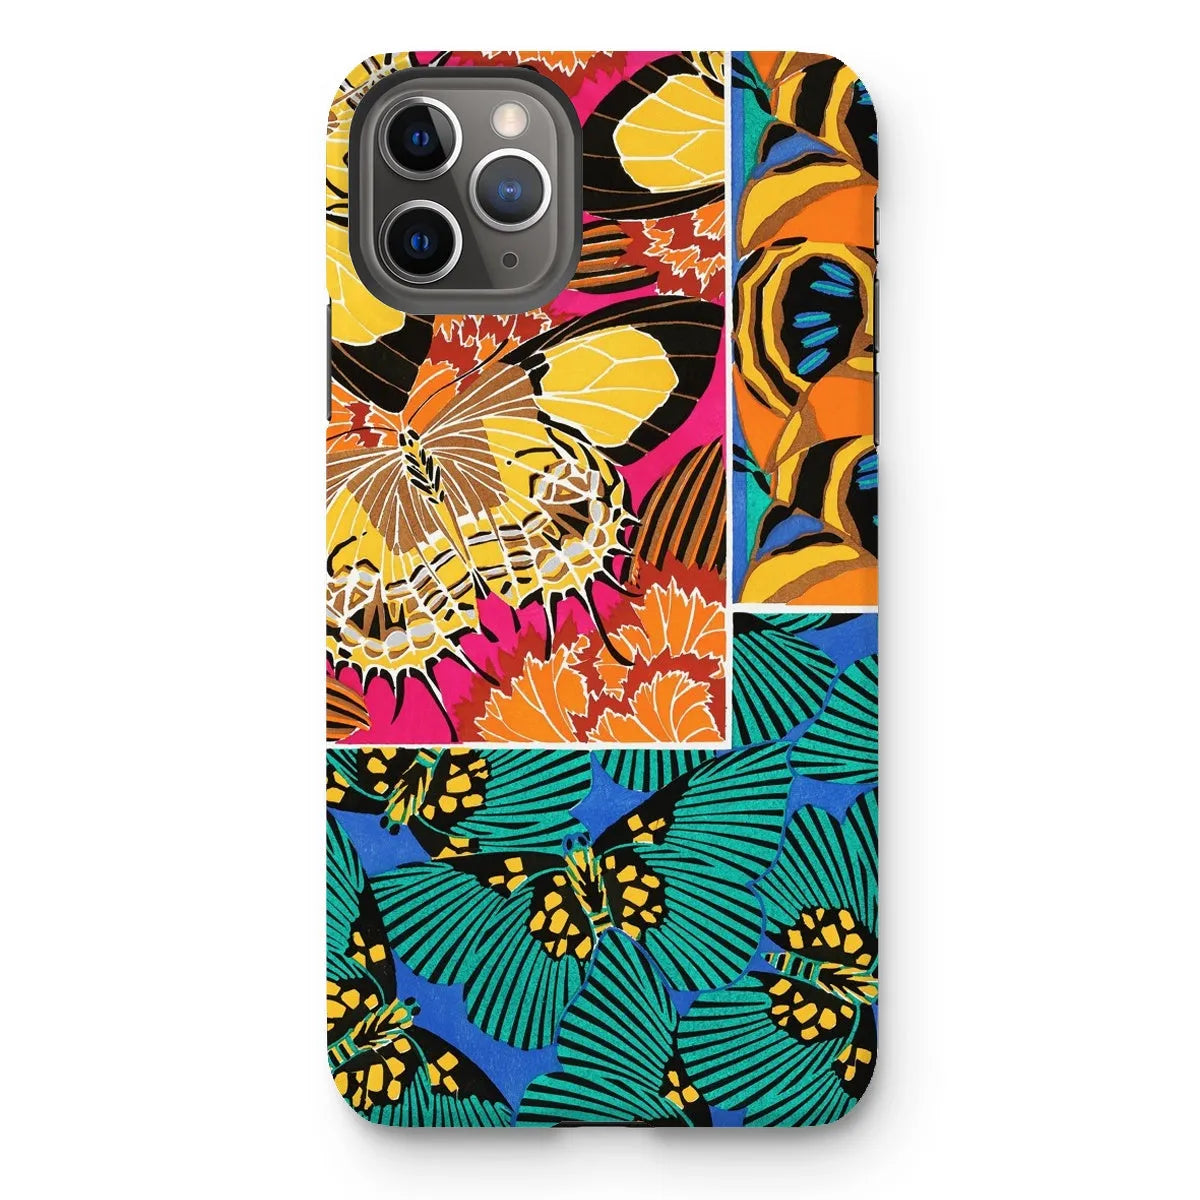 Rainbow Butterfly Aesthetic Art Phone Case - E.a. Seguy - Iphone 11 Pro Max / Matte - Mobile Phone Cases - Aesthetic Art